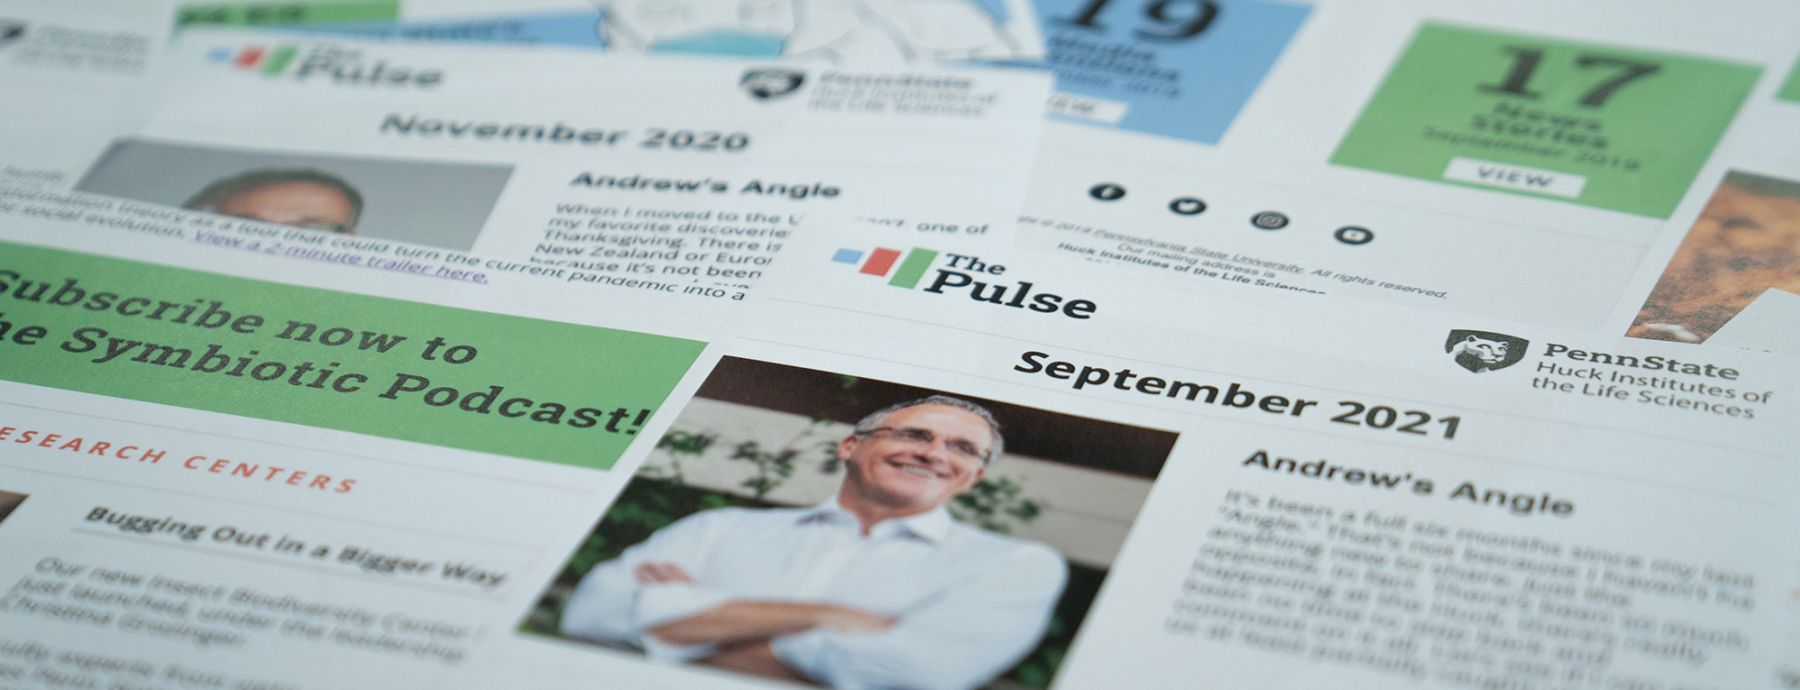 The header image depicts several issues of The Pulse printed out and displayed on a desk.